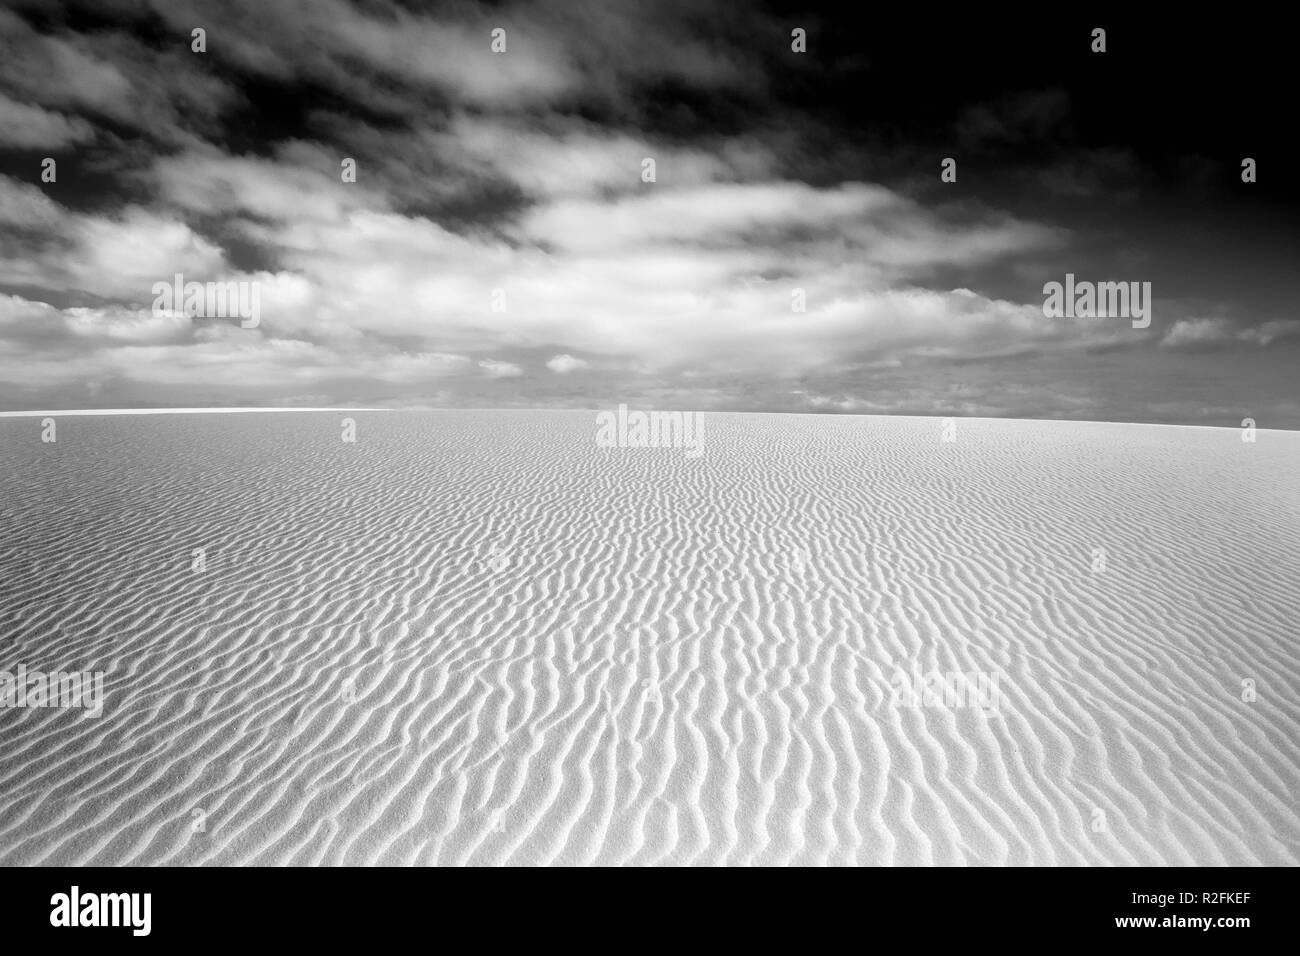 fine art landscape wallpaper of desert dunes in black and white. pattern with straight lines with dramatic sky with clouds Stock Photo